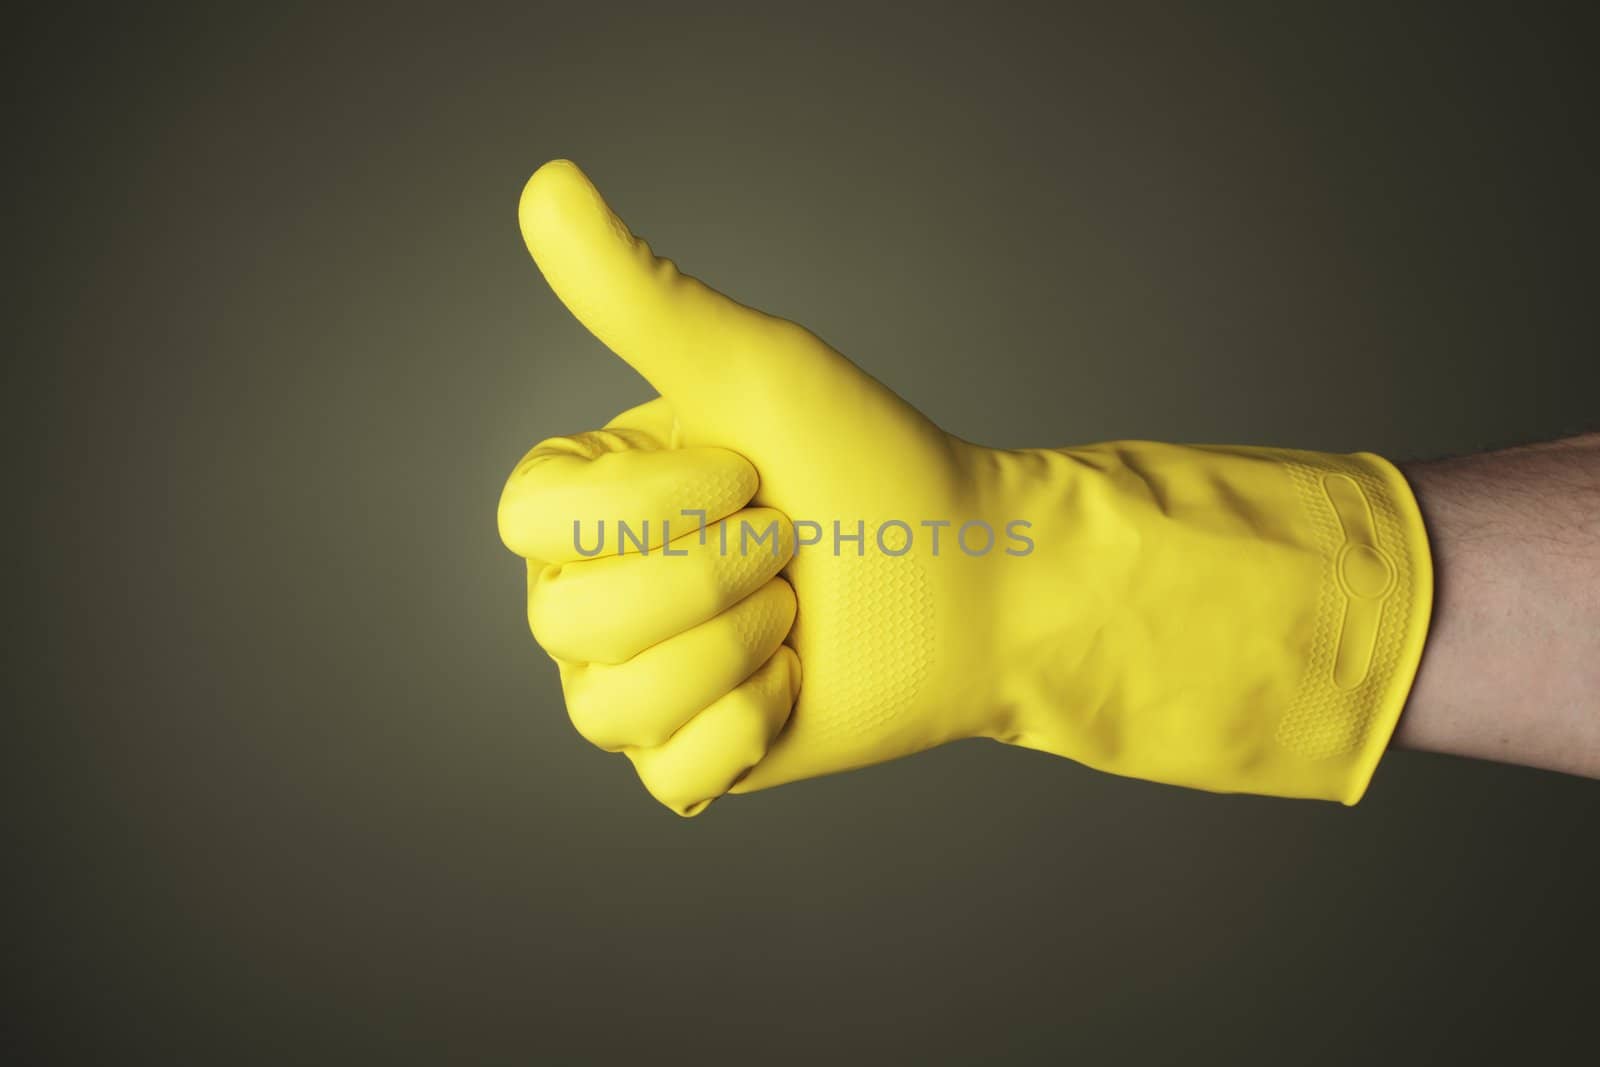 A hand wearing a yellow protective rubber glove does "thumb up" gesture